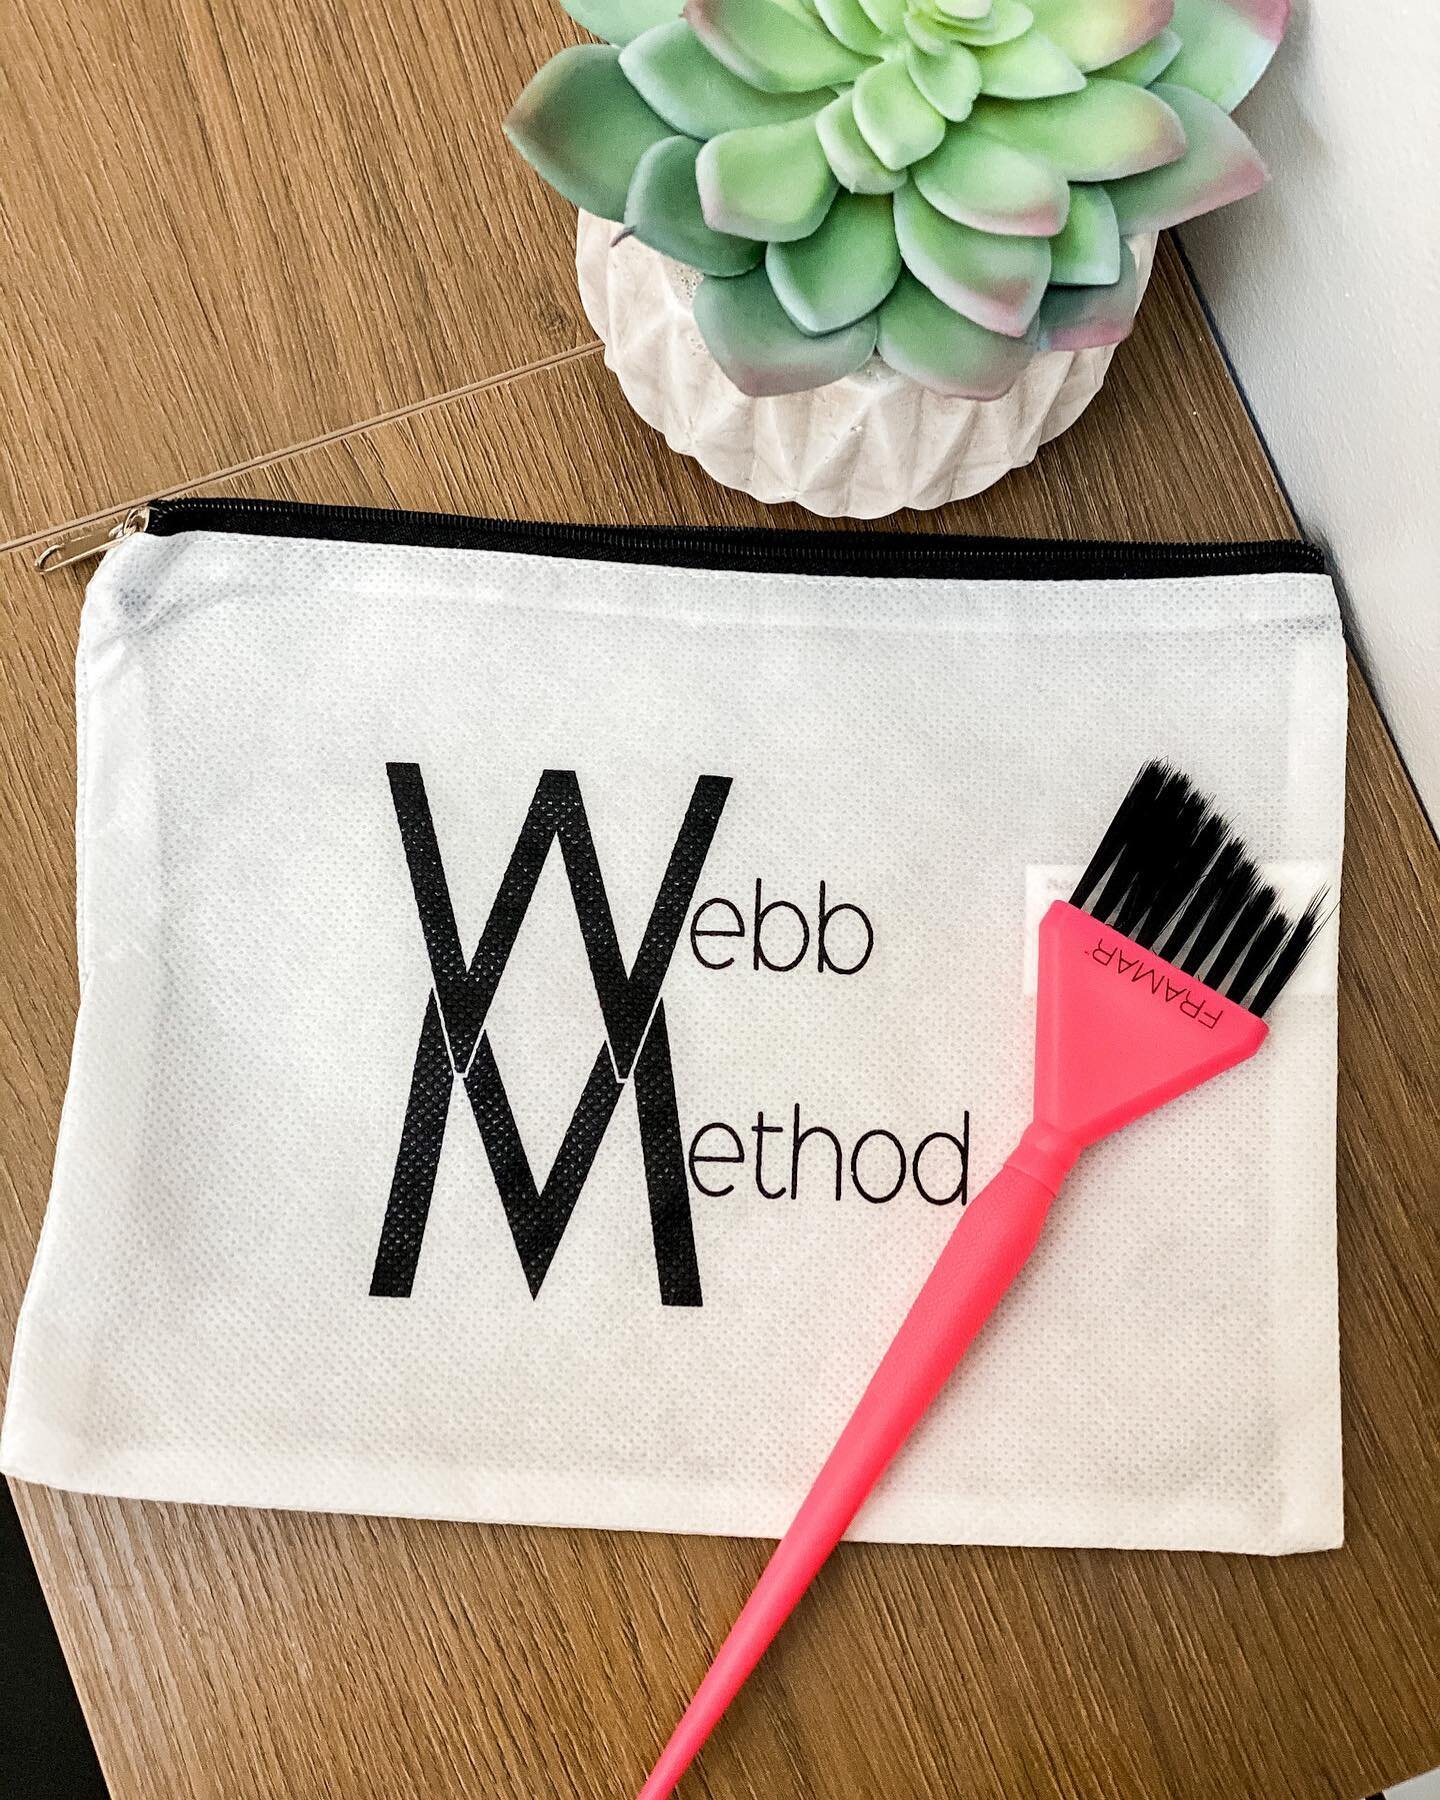 Want to book with #WebbMethod + curious about my rates? Then check this out below:
⠀⠀⠀⠀⠀⠀⠀⠀⠀⠀
RATES STARTING AT:
⠀⠀⠀⠀⠀⠀⠀⠀⠀⠀
Women&rsquo;s Haircut - $55
Men&rsquo;s Haircut - $30
Children&rsquo;s Haircut - $20 - $35
All-over Color - $100
Root Touch- U